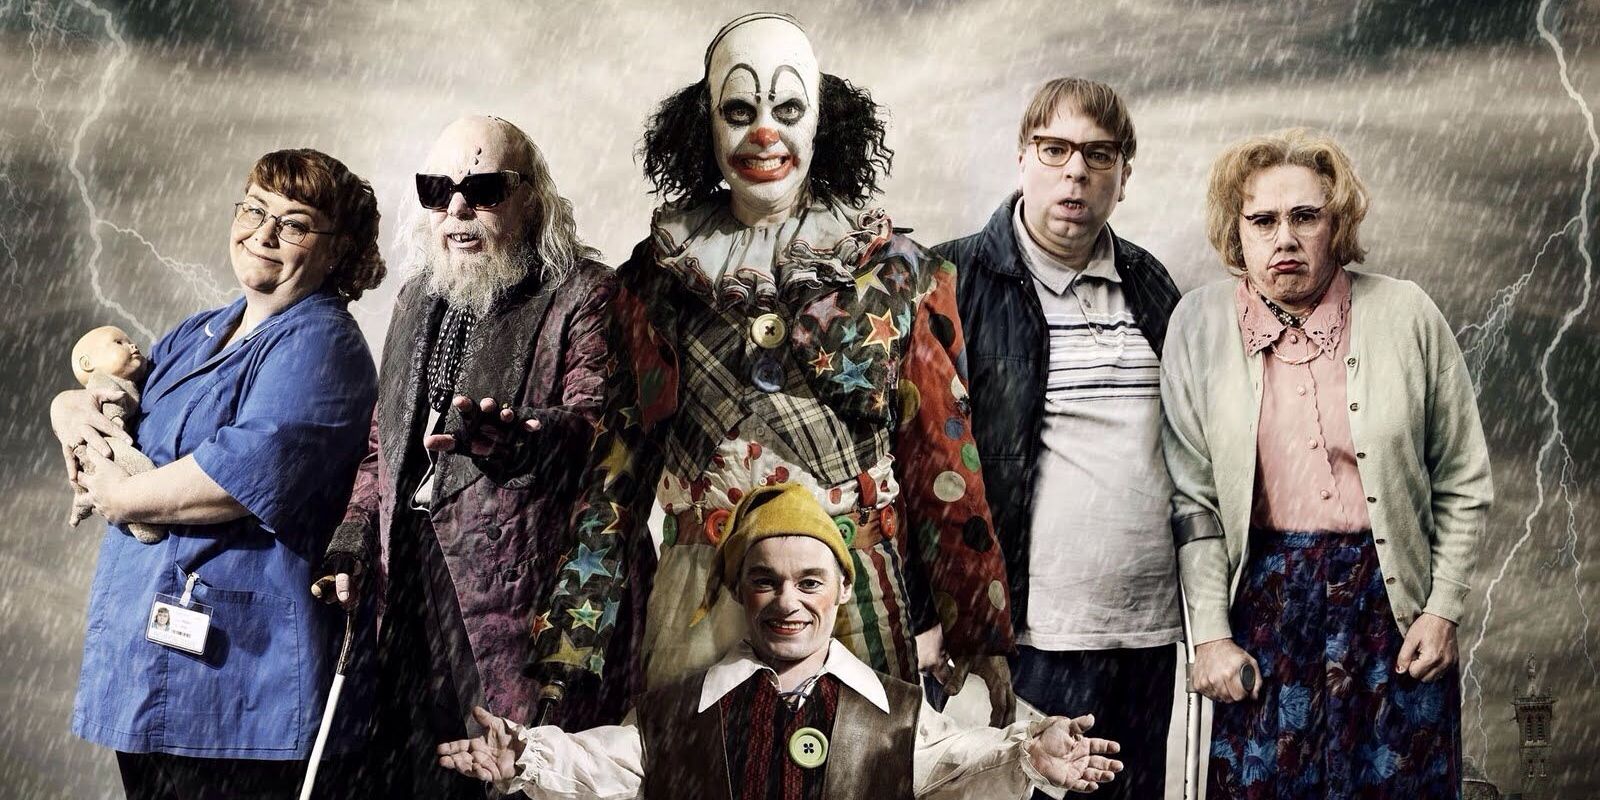 The Cast of Psychoville